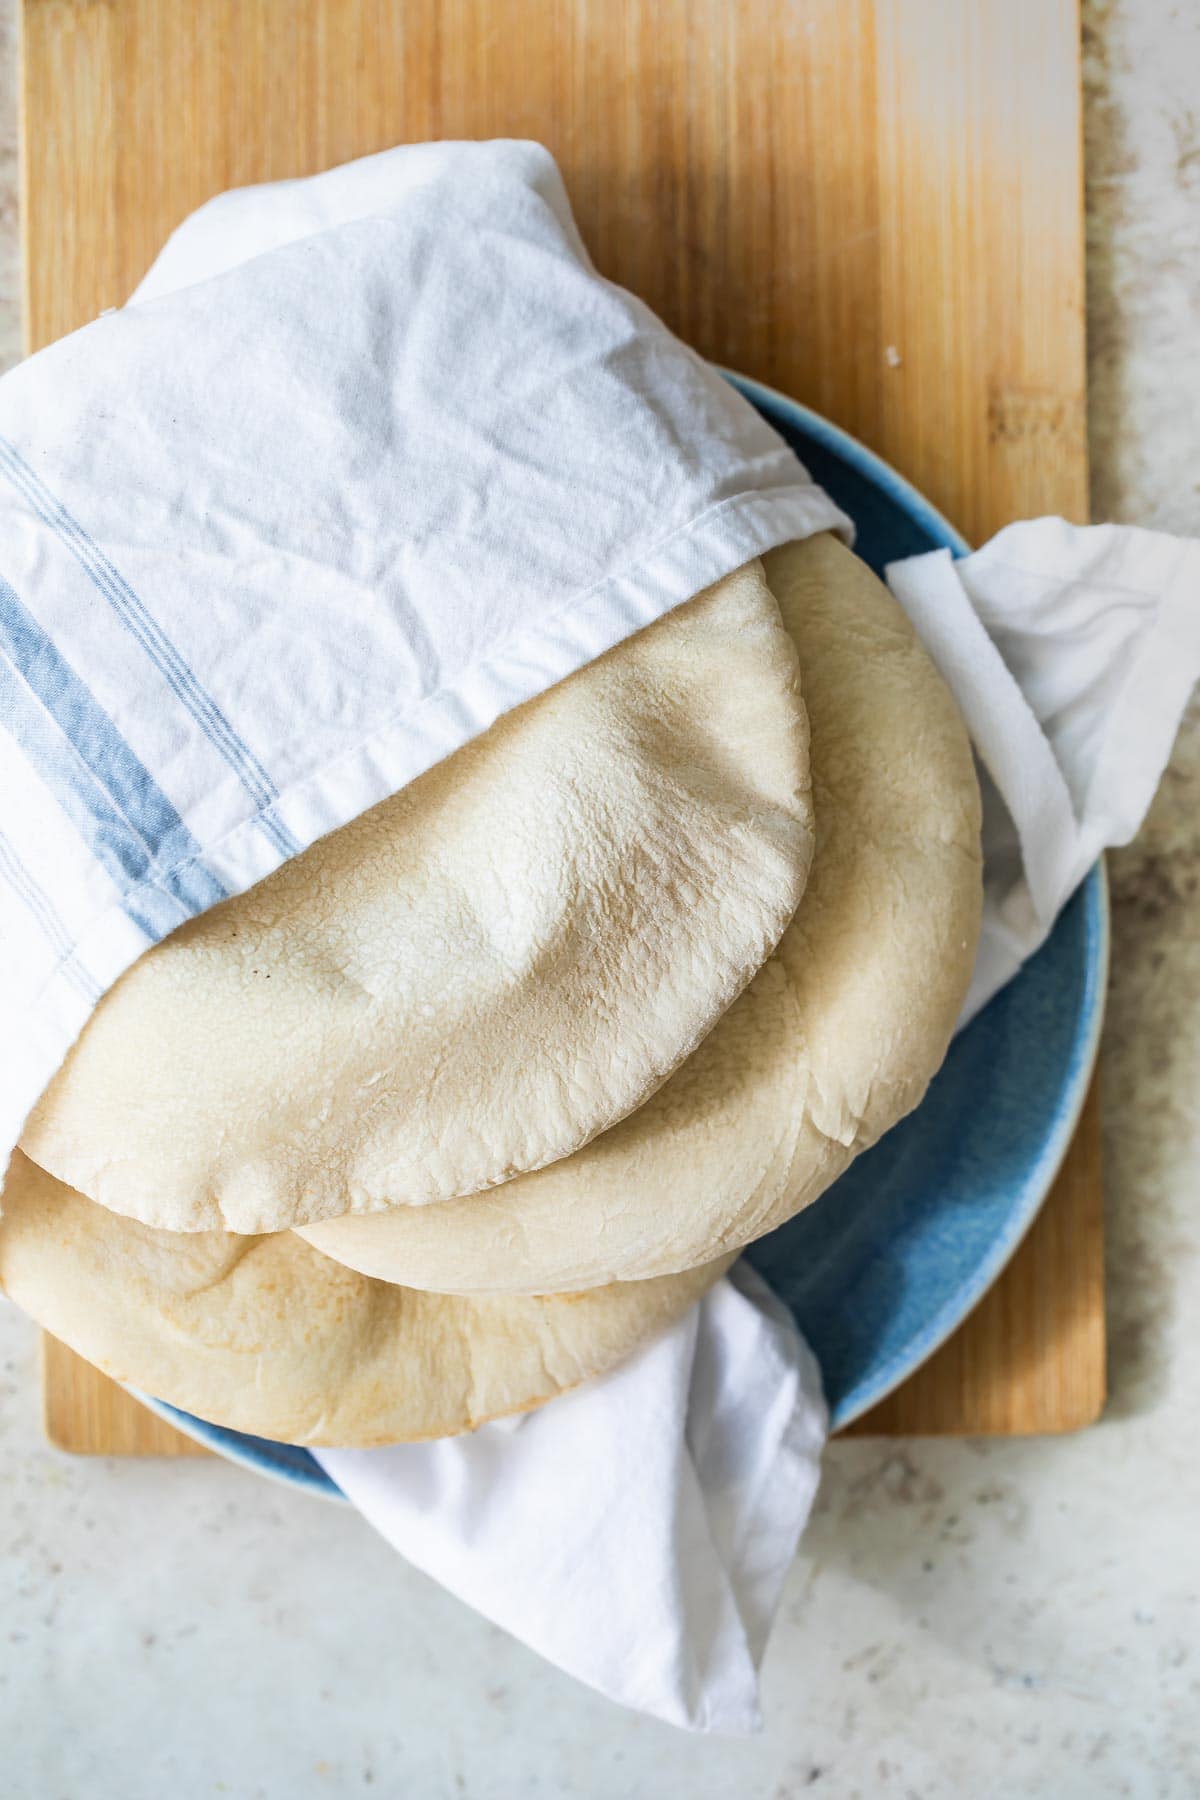 Homemade pita bread wrapped in a white towel on a plate.